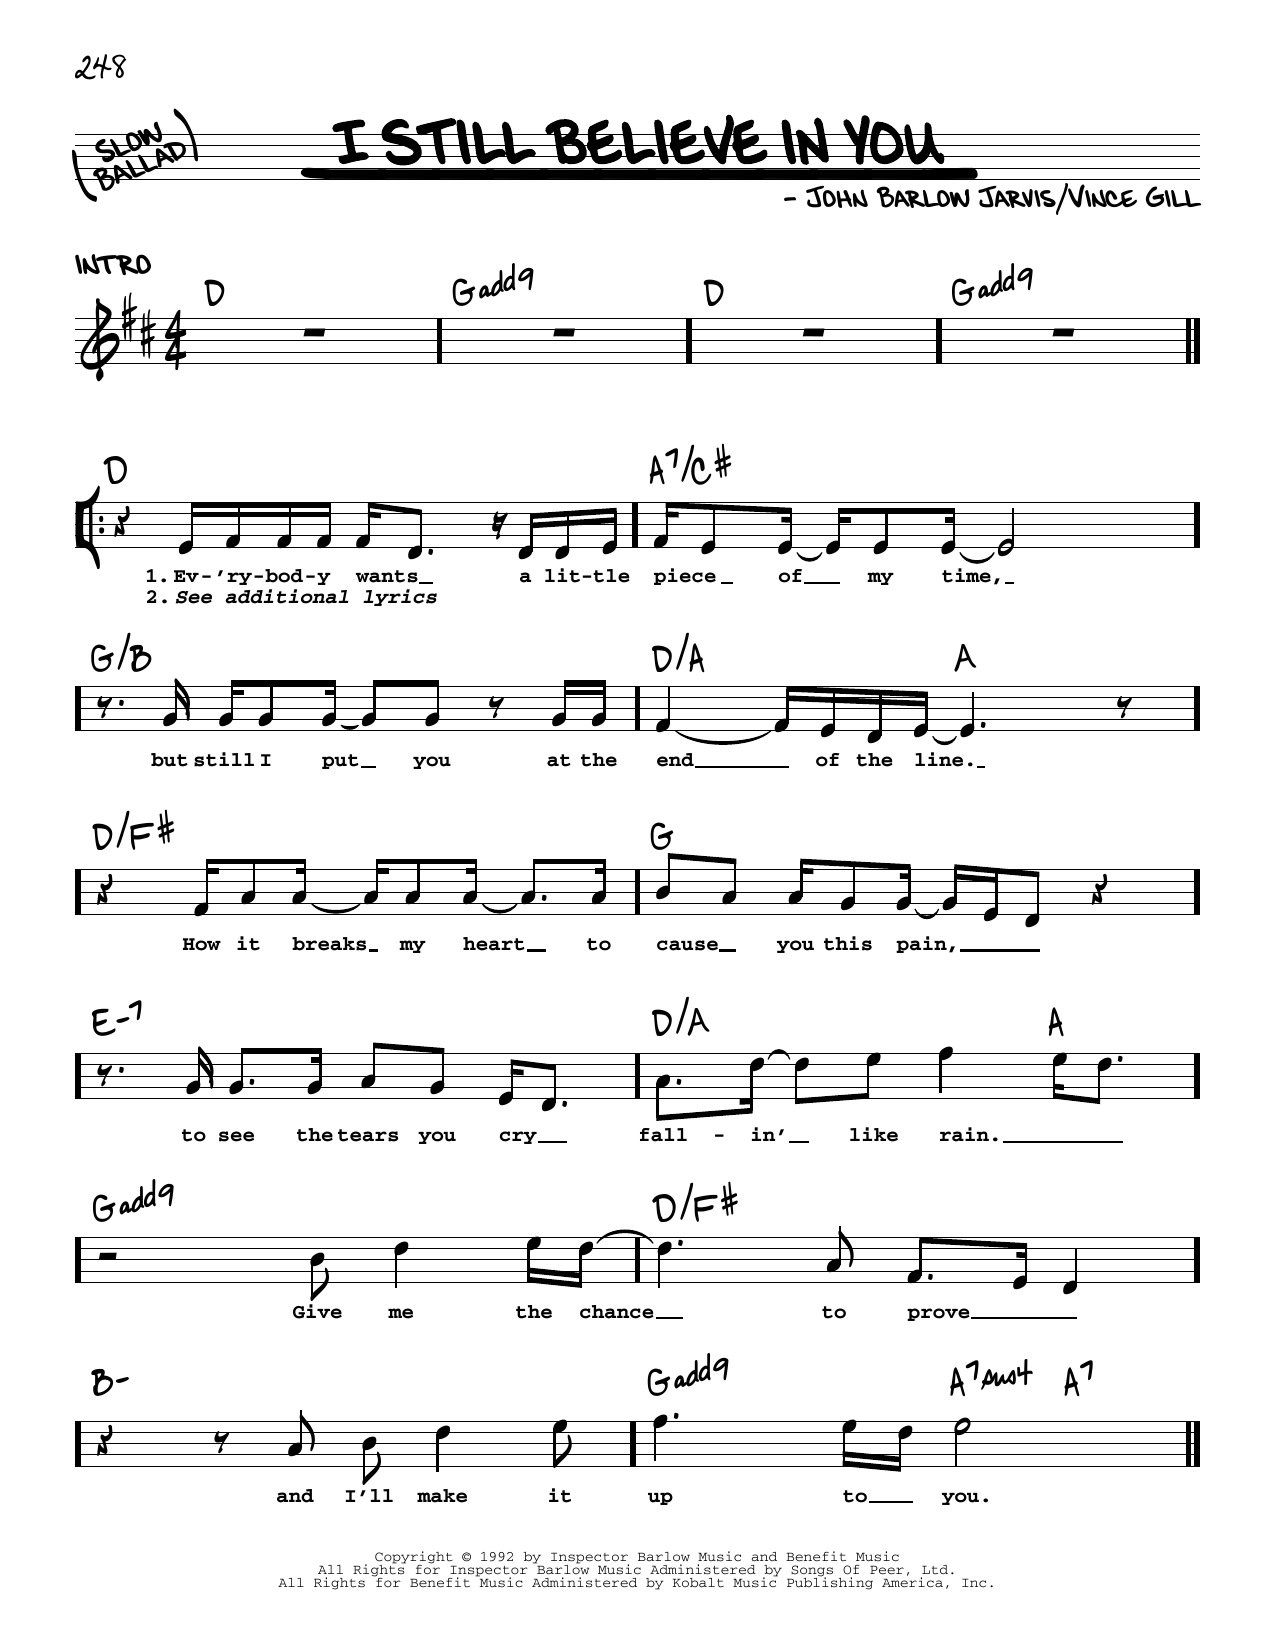 Download Vince Gill I Still Believe In You Sheet Music